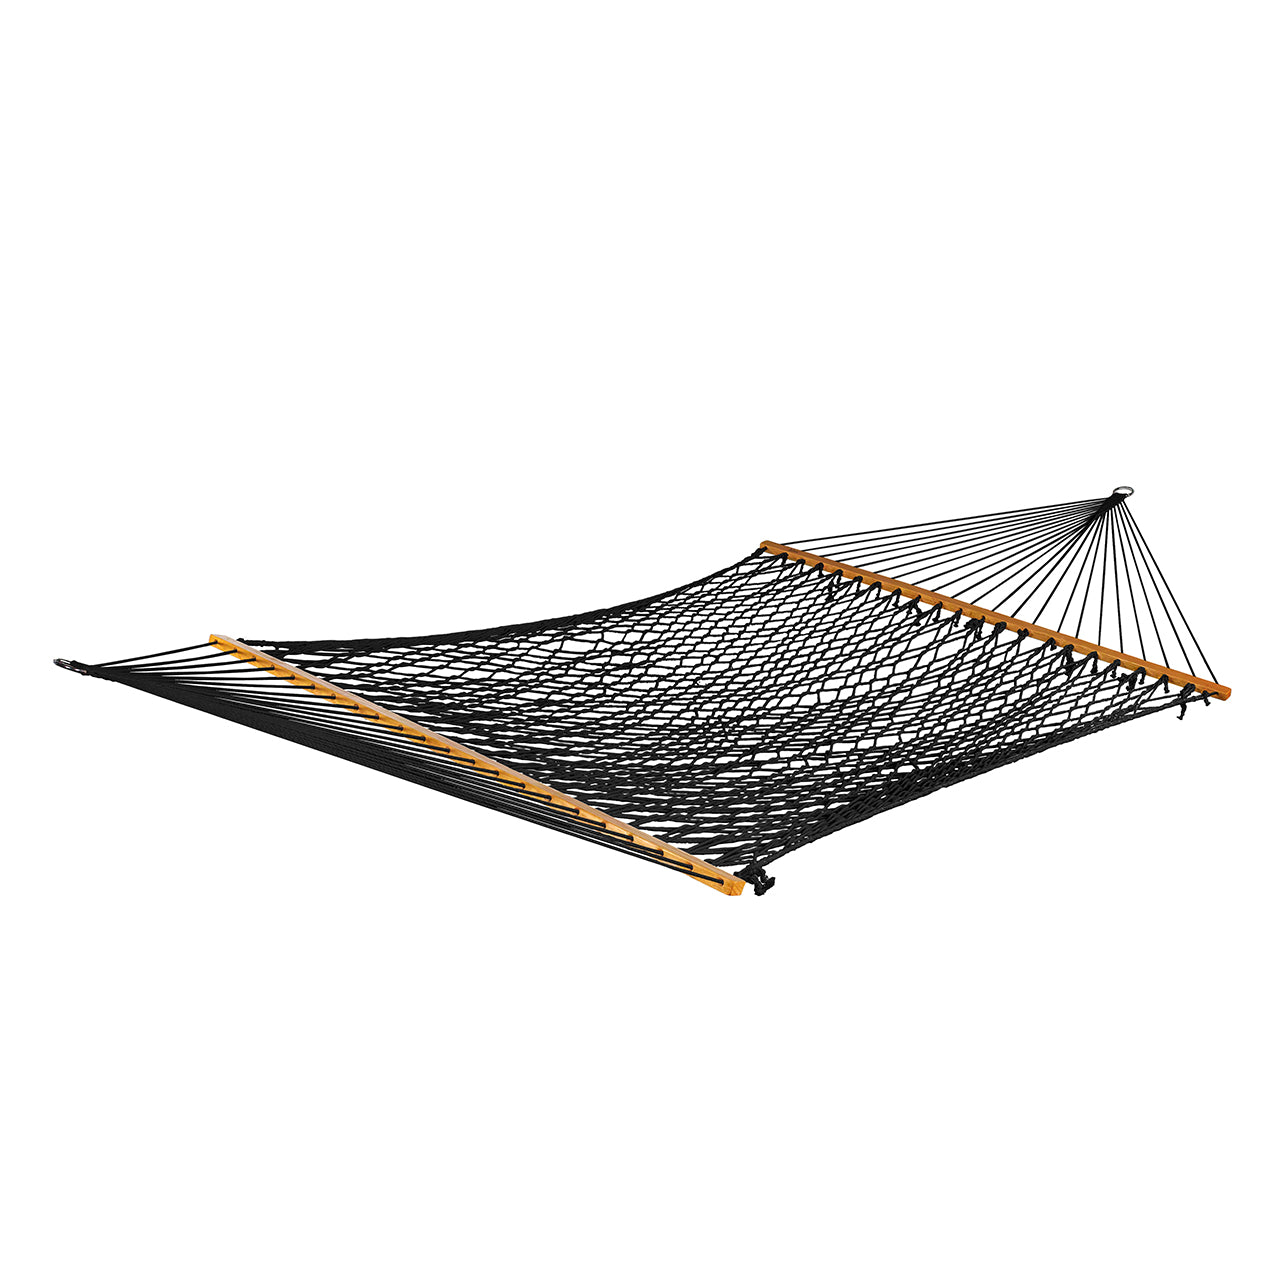 Bliss Hammocks 60-inch Wide Cotton Rope Hammock with Spreader Bar, S Hooks, and Chains in the black variation.